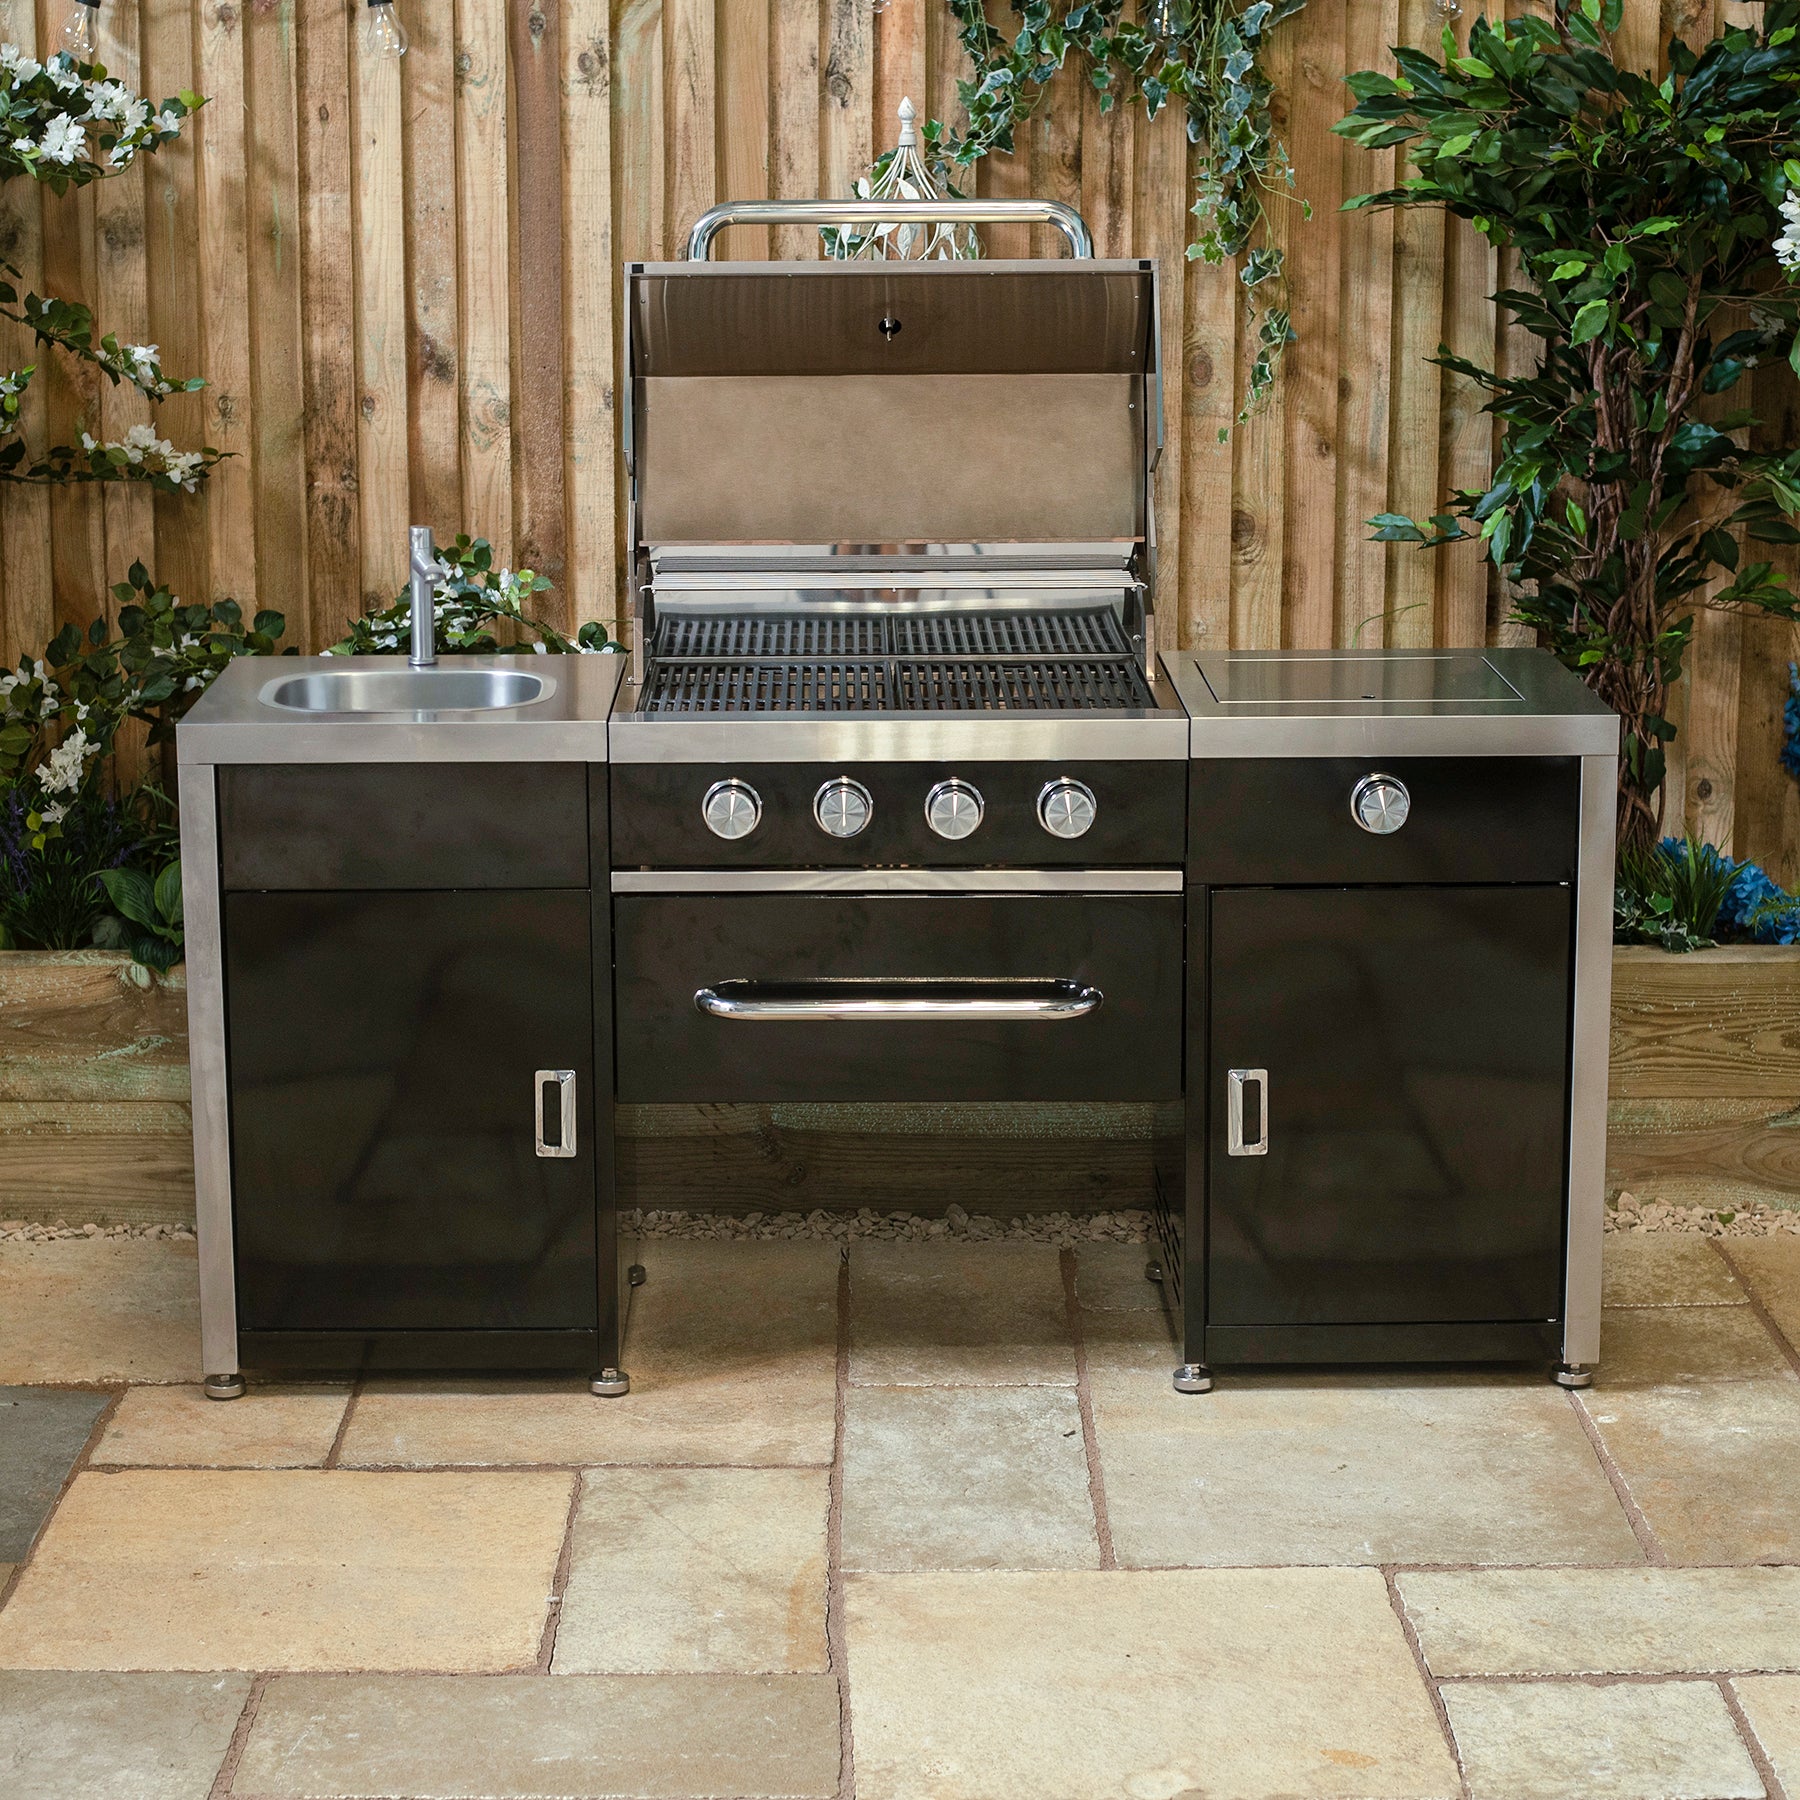 Draco Grills Black 4 Burner Gas Barbecue Outdoor Kitchen Island with S ...